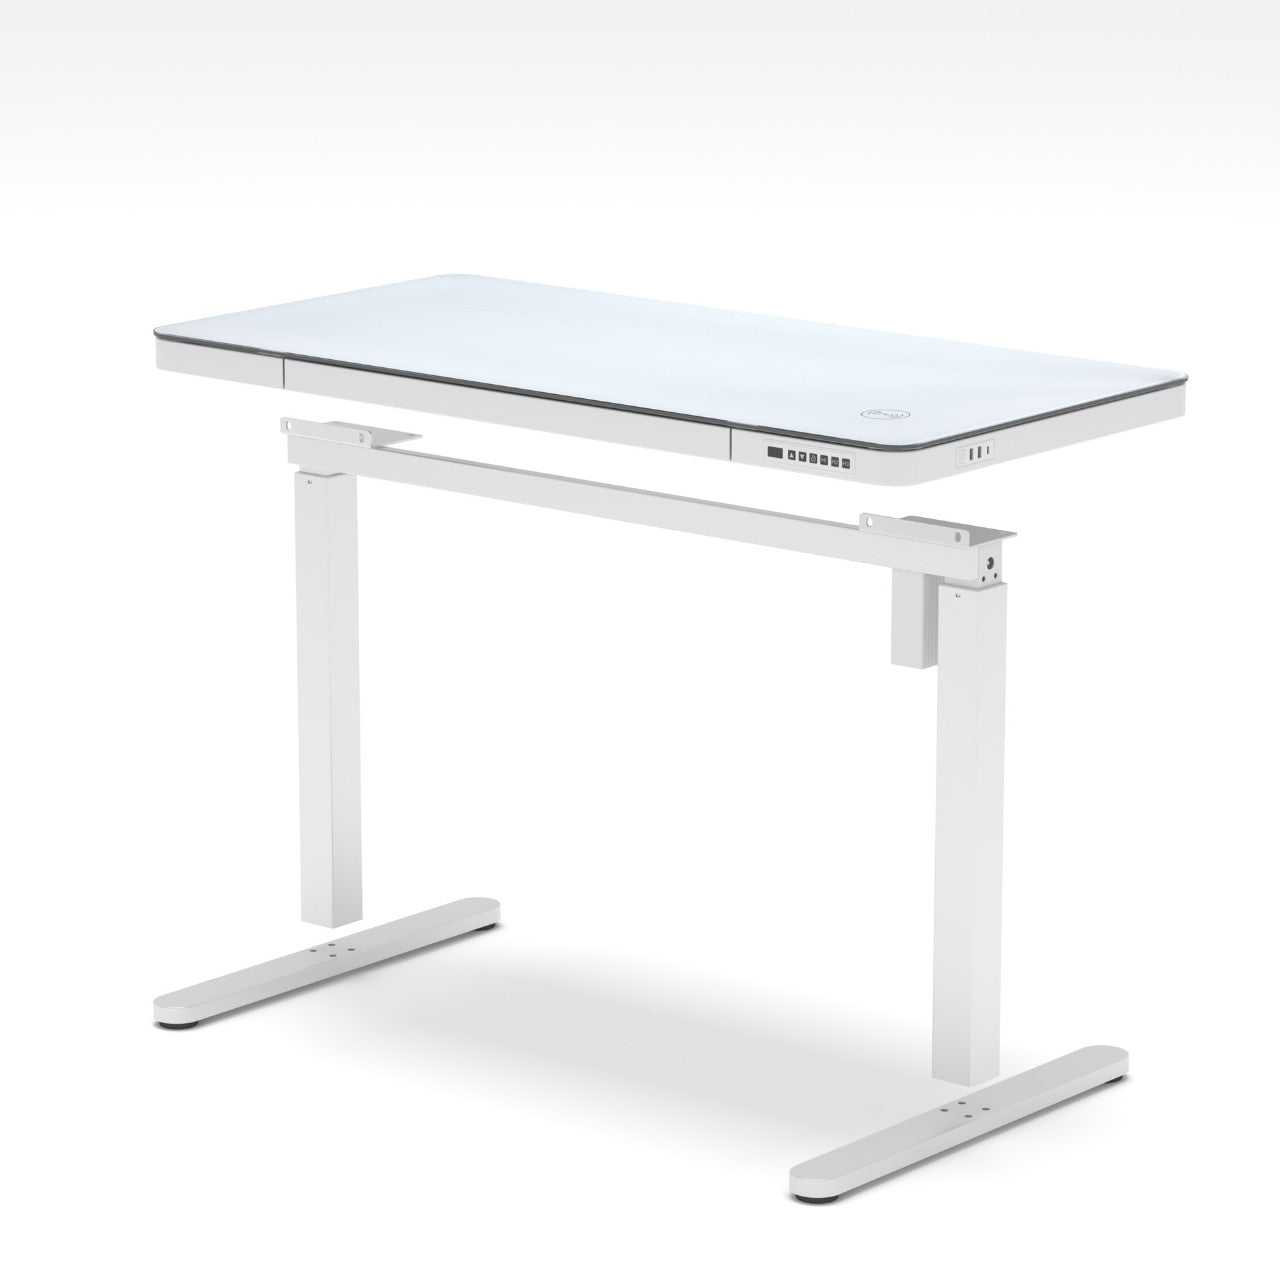 KOWO standing desk comes with pre-assembled desk frame for easy installation